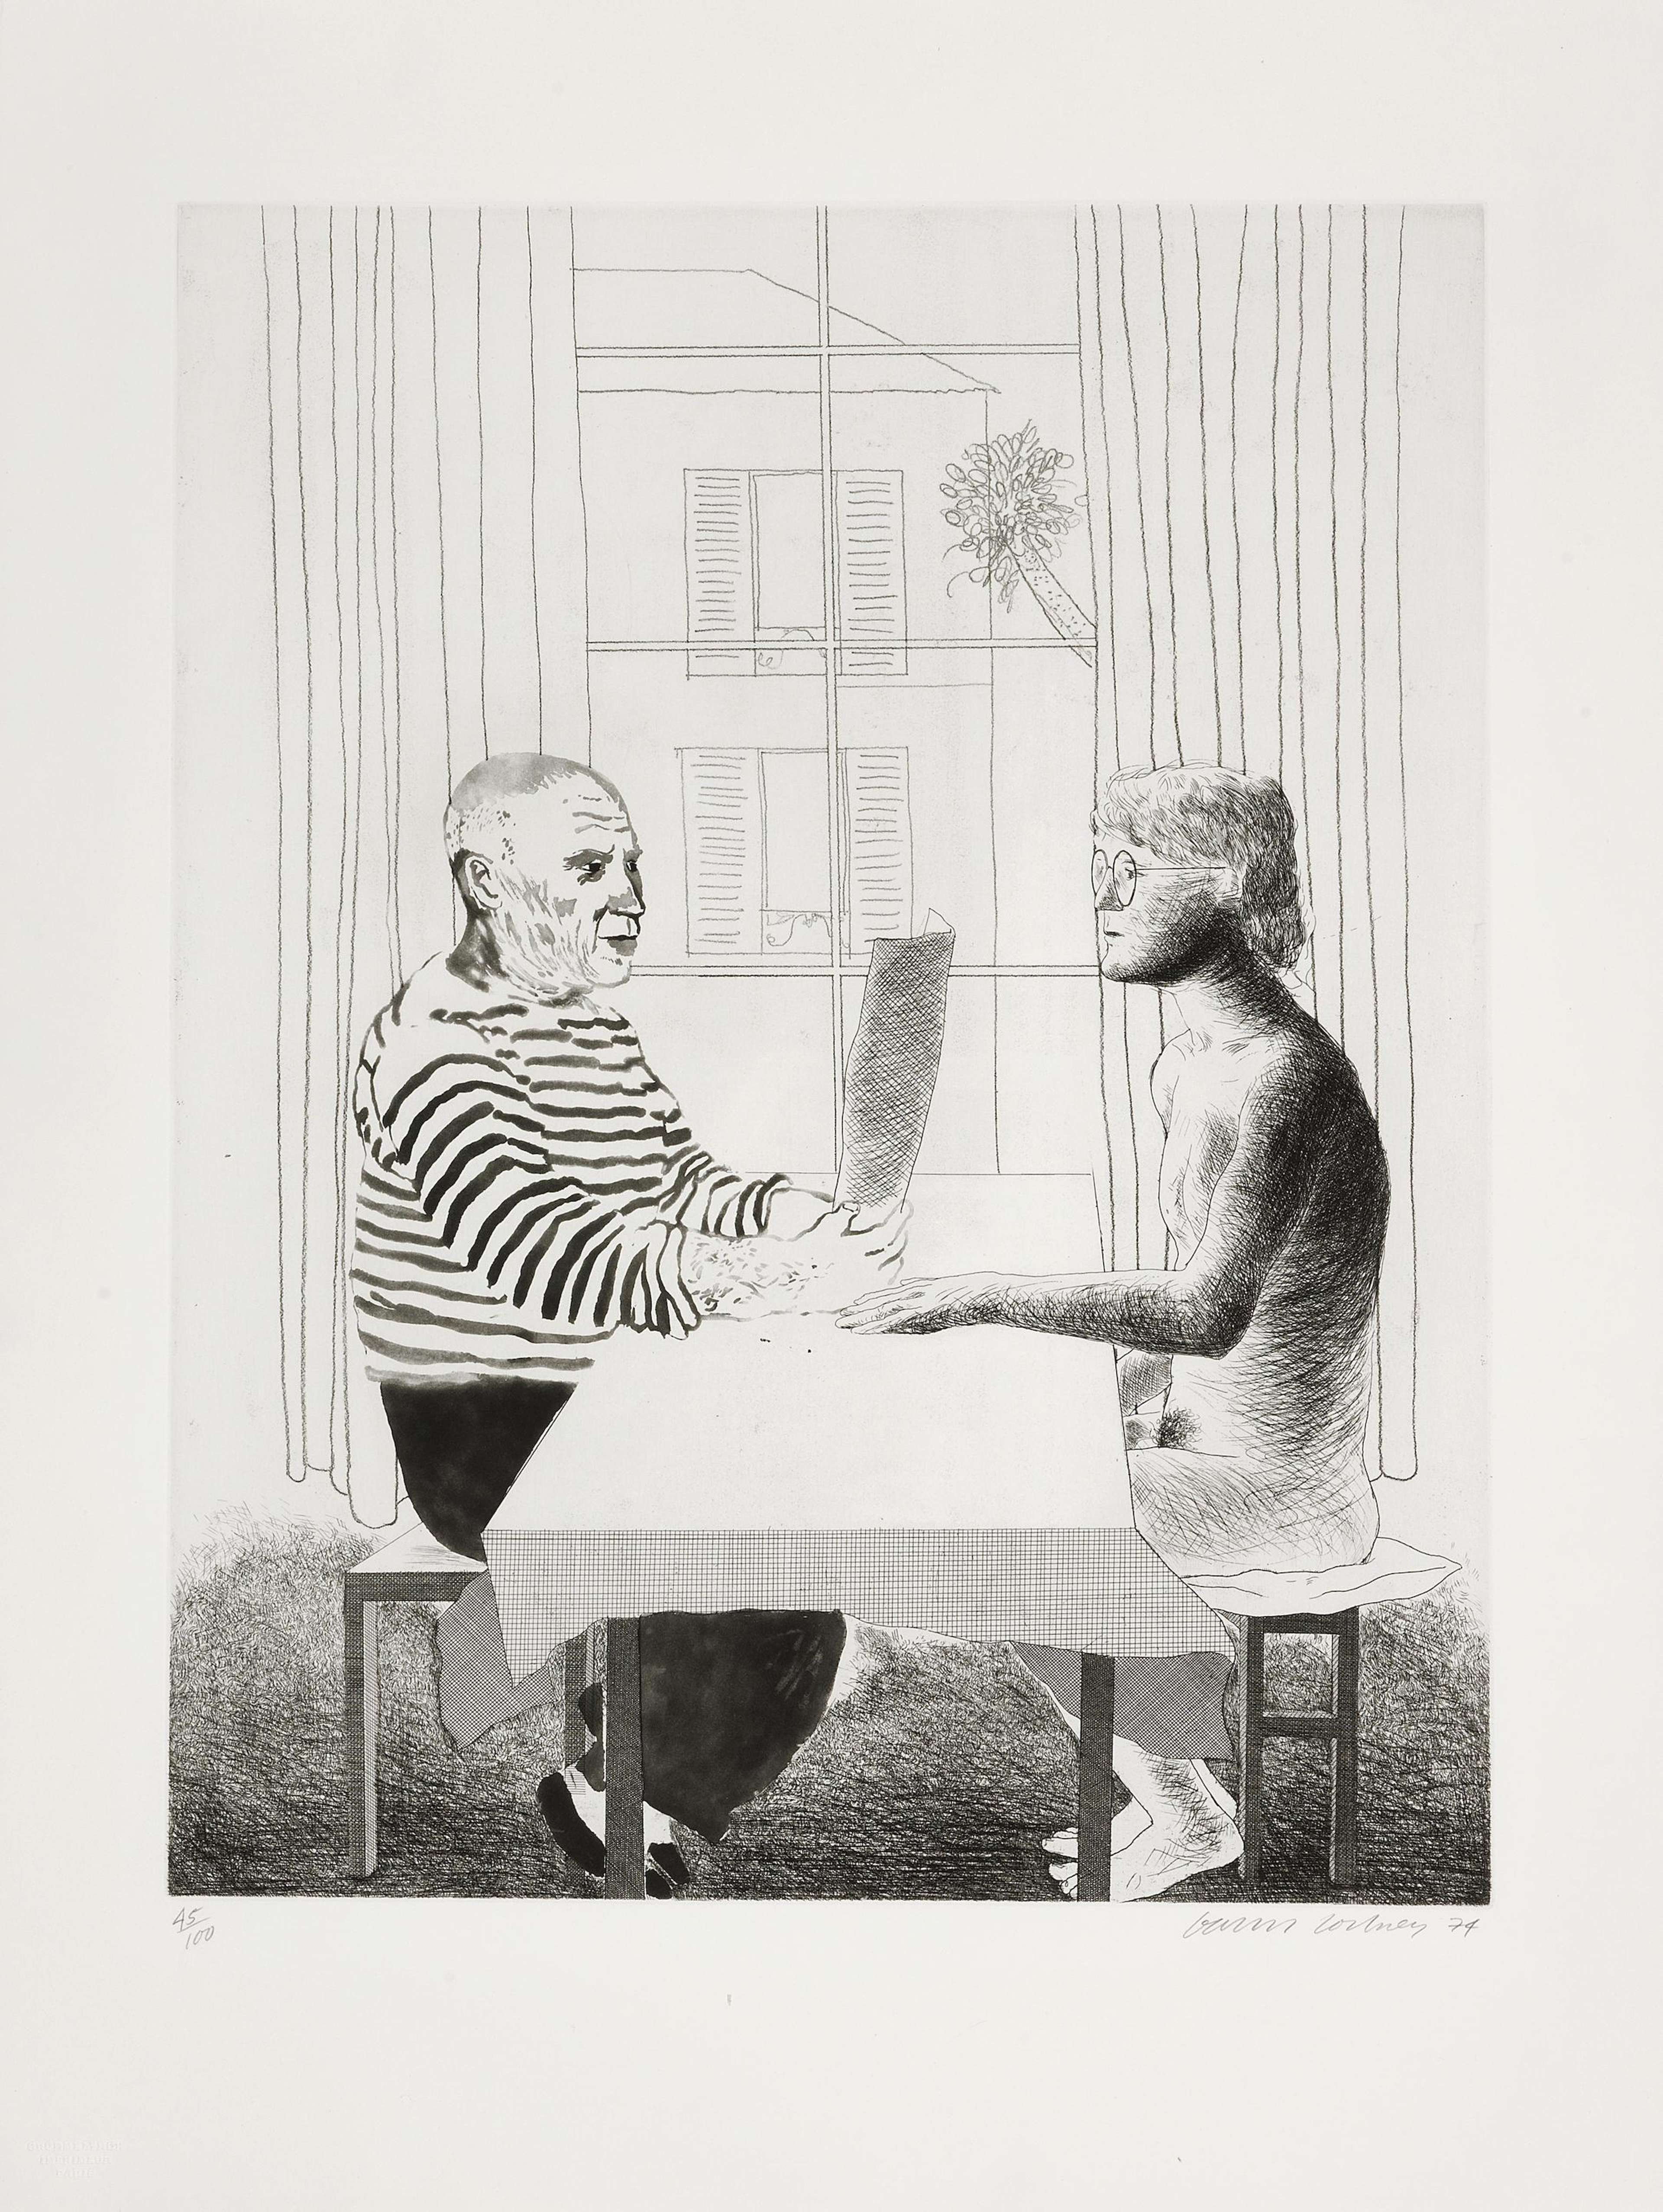 David Hockney’s Artist And Model. A monochromatic etching of a seated Pablo Picasso painting a nude David Hockney across from him at the same table in an interior setting. 